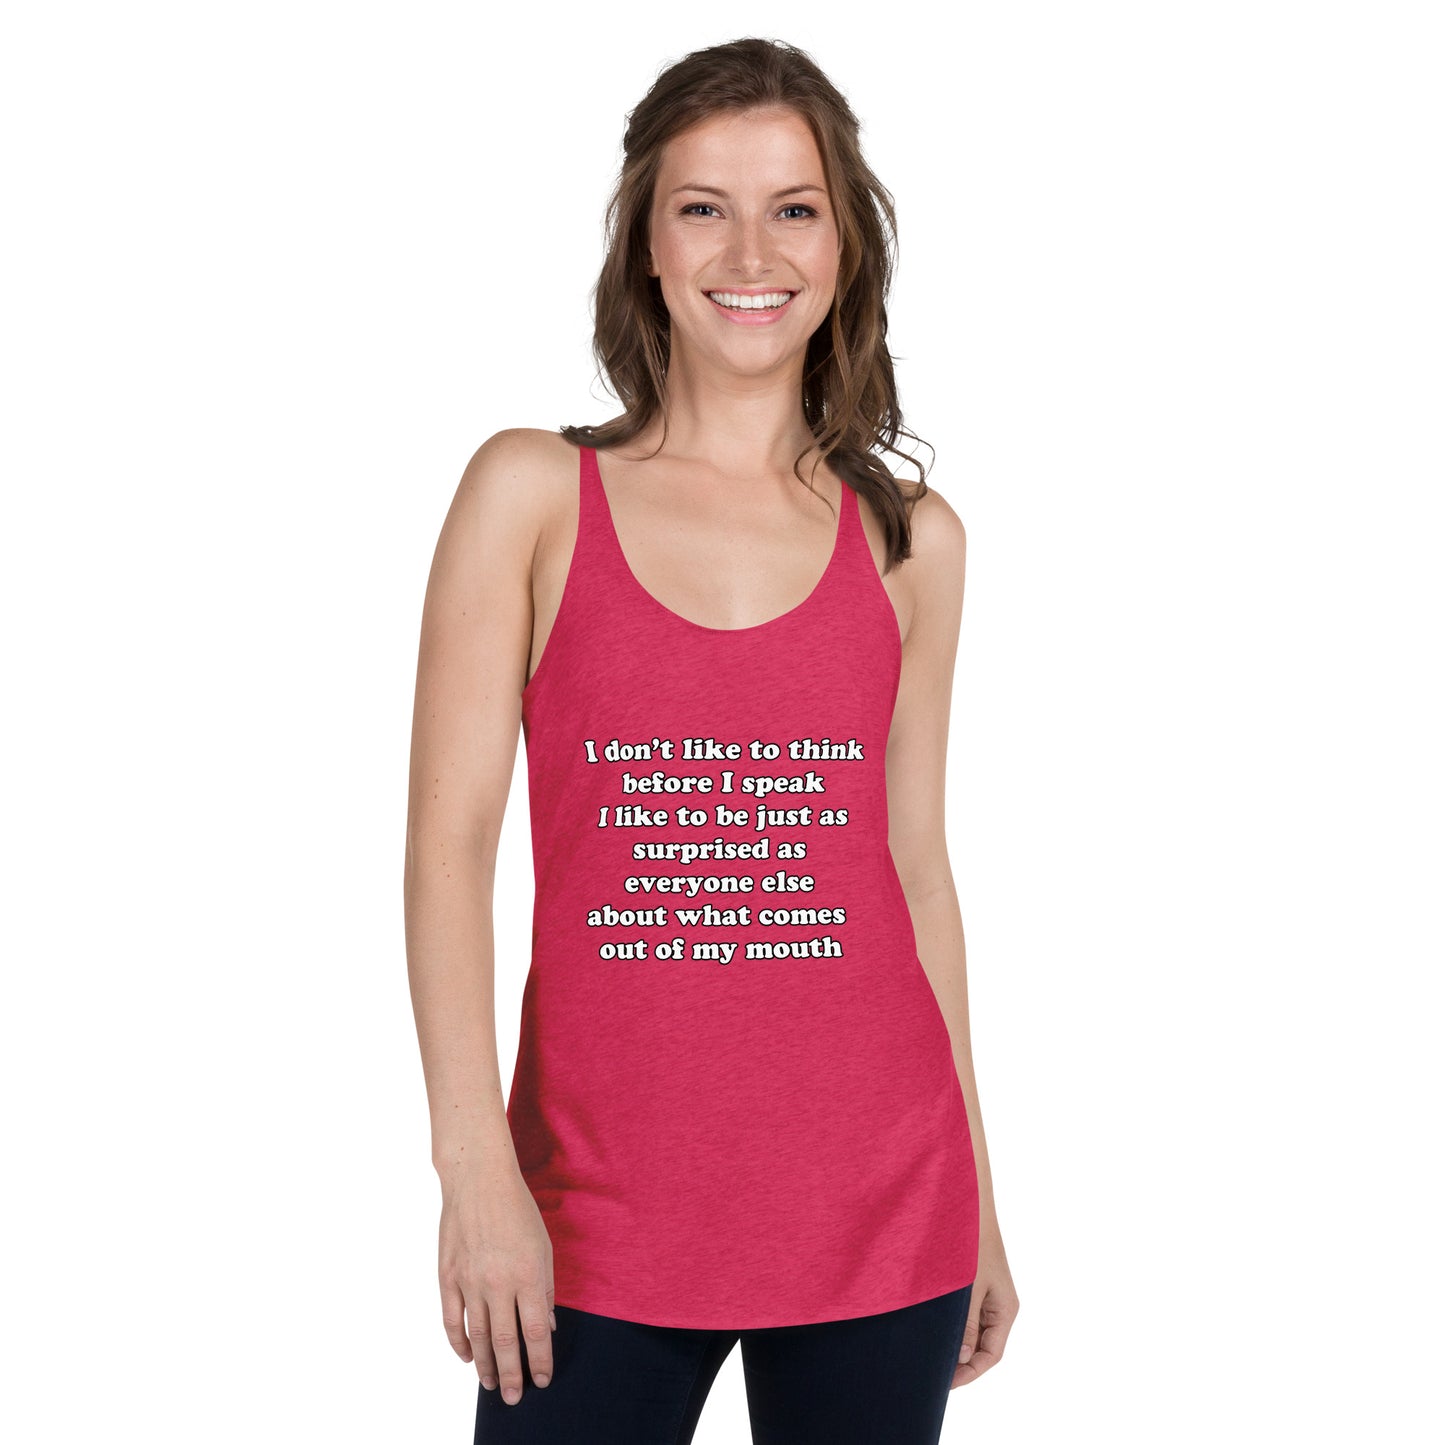 Woman with pink tank top with text “I don't think before I speak Just as serprised as everyone about what comes out of my mouth"